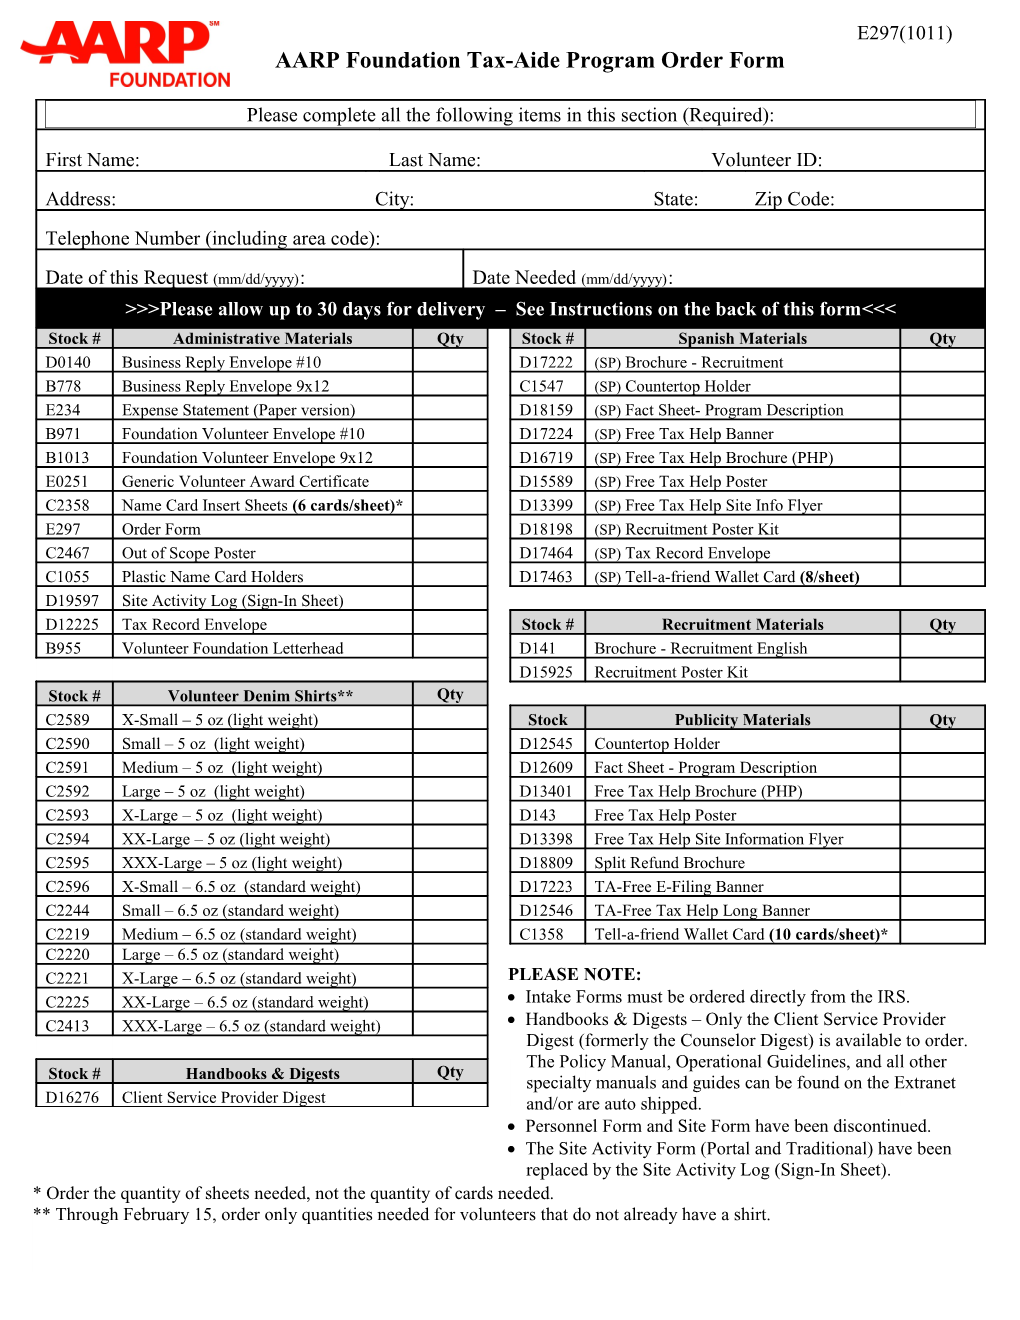 AARP Tax-Aide Order Form